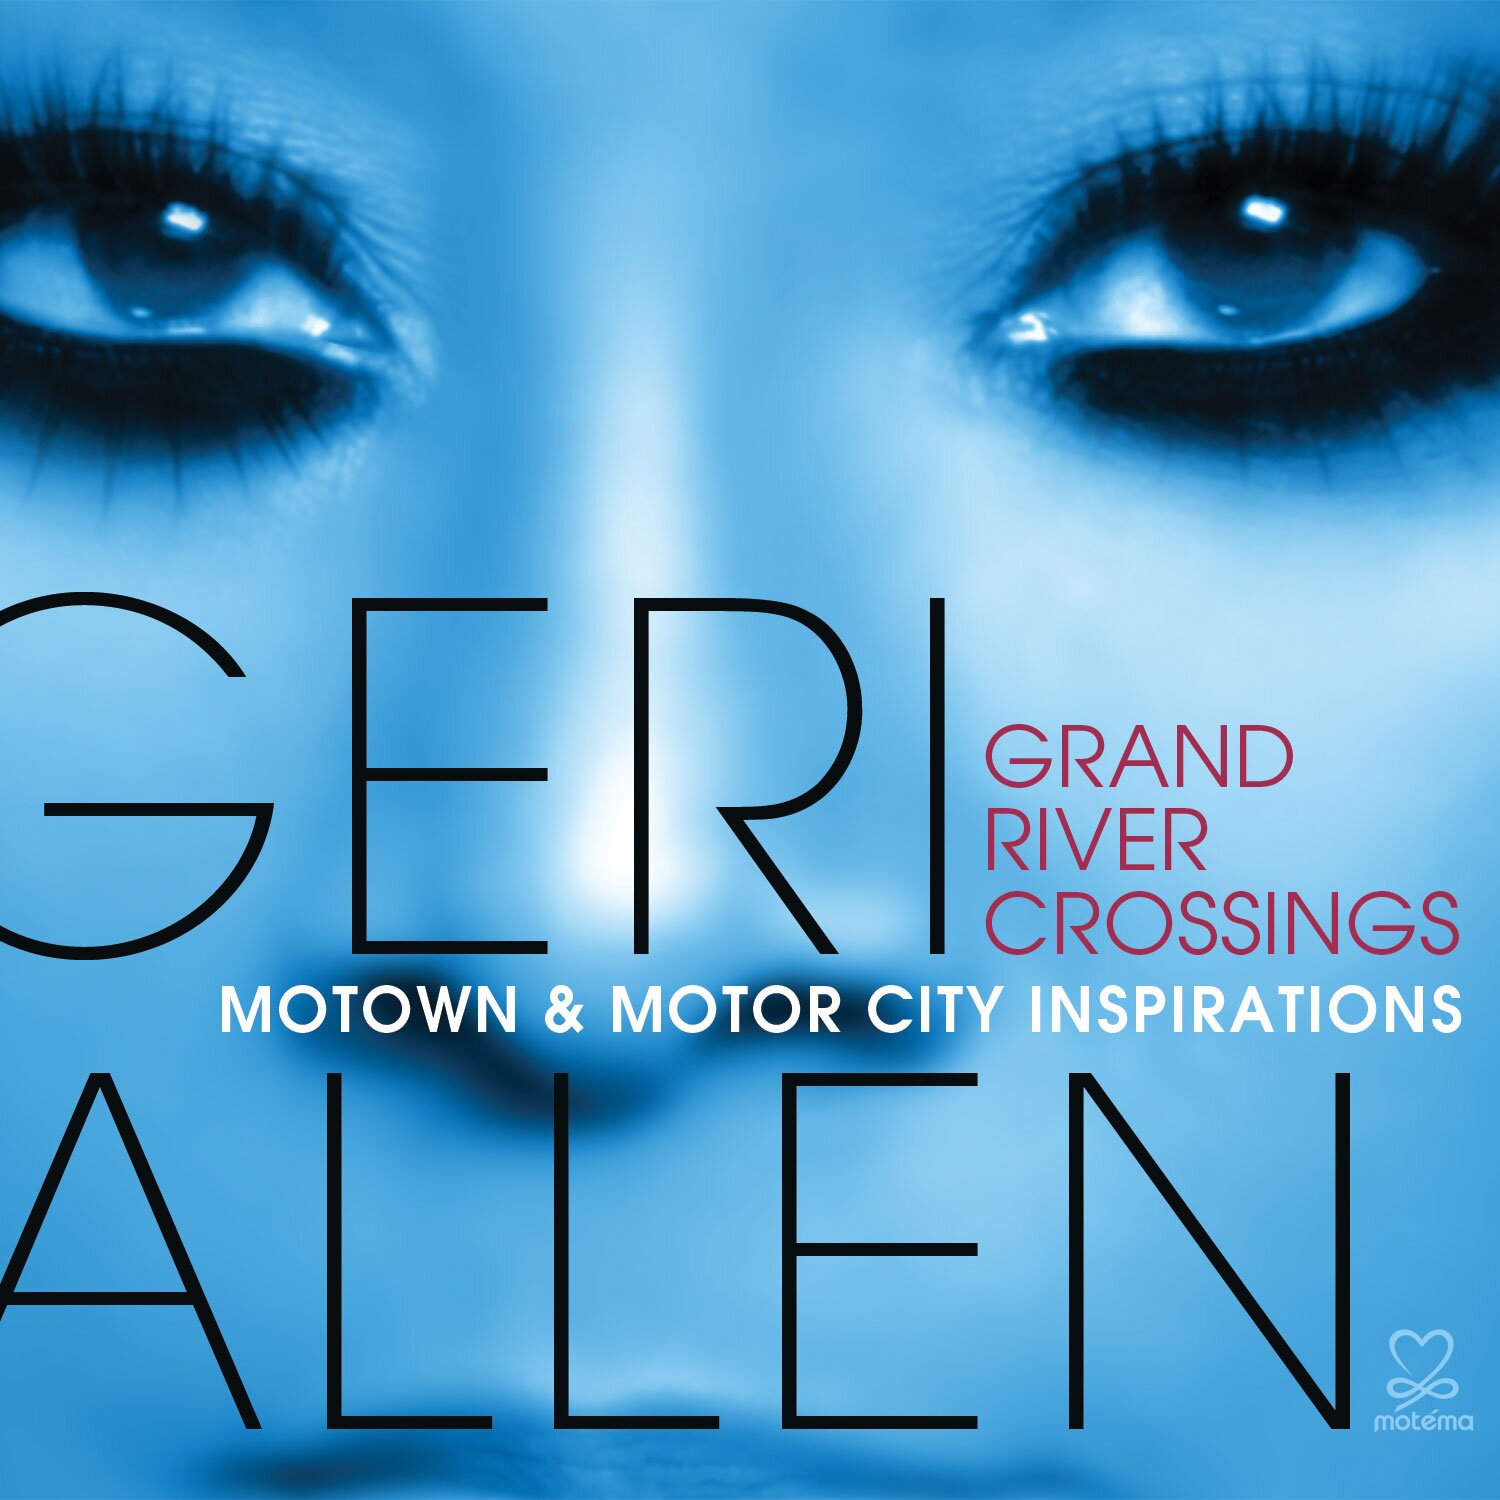 Pre-order the new album 'Grand River Crossings: Motown and Motor City Inspirations' on iTunes! - http://t.co/xa6xpvD9v2